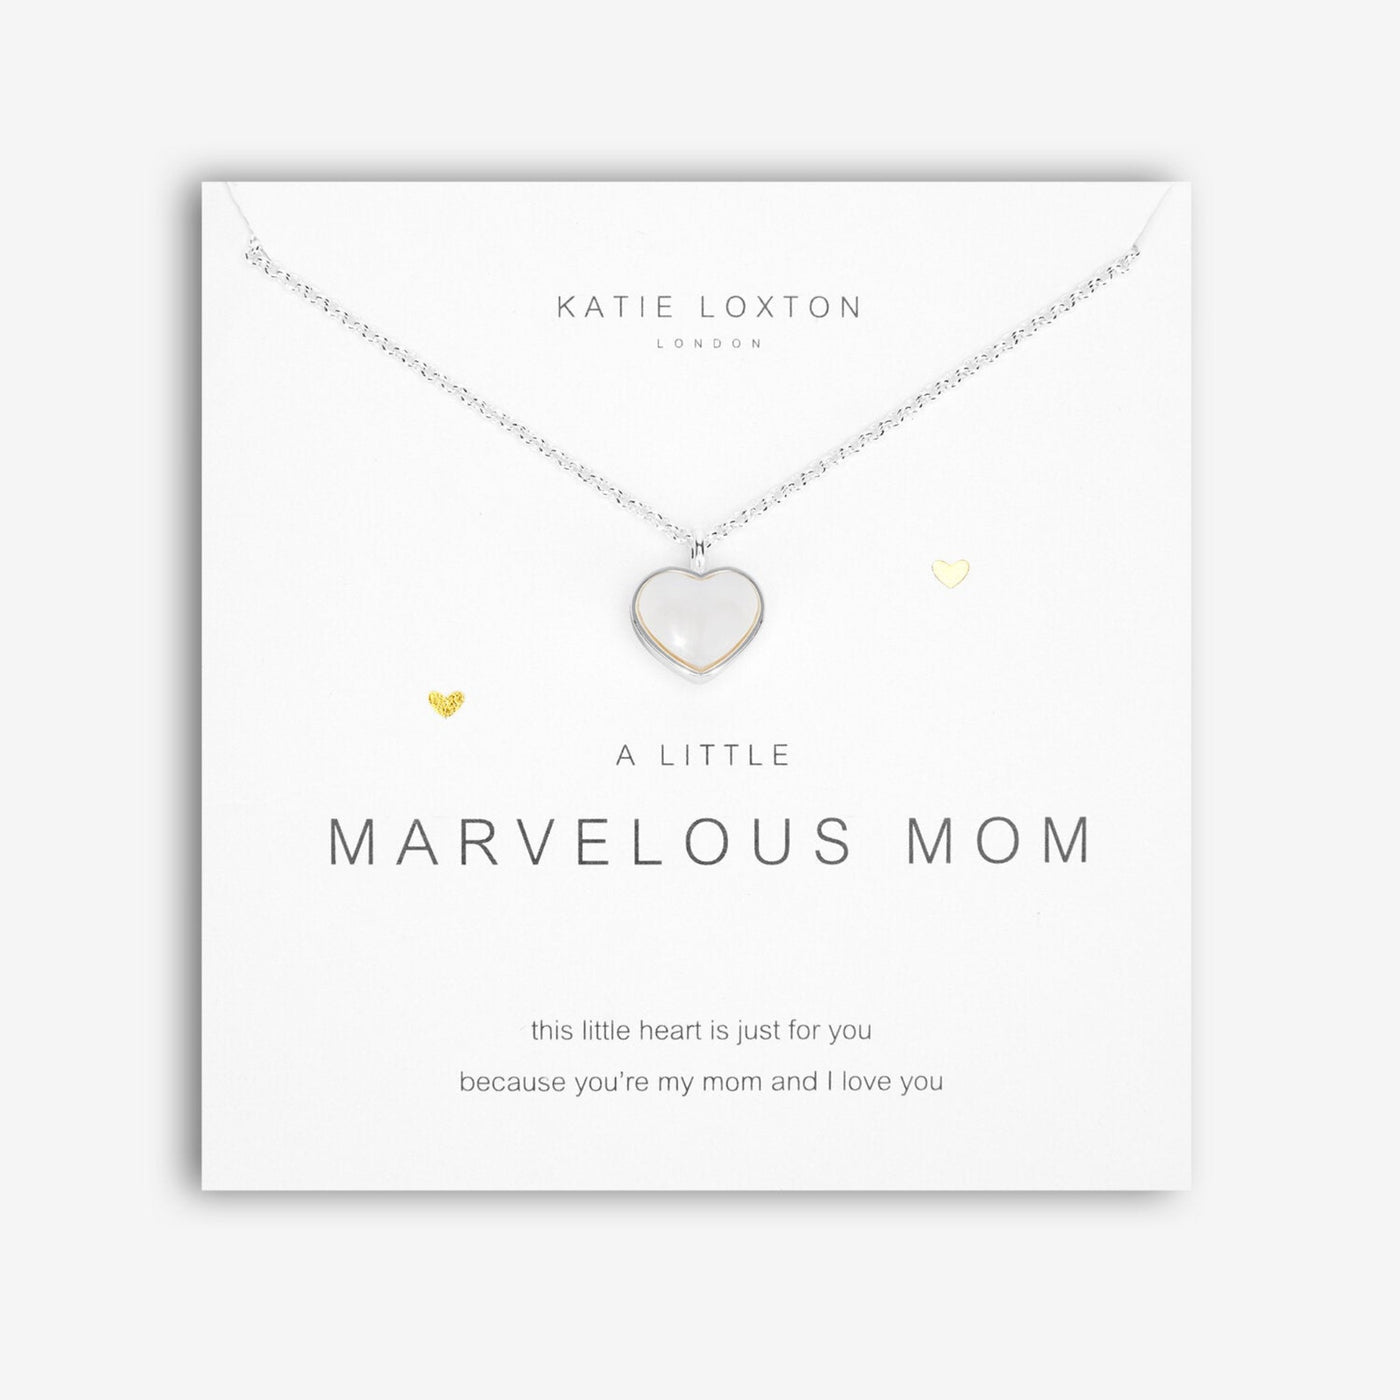 Marvelous Mom Necklace